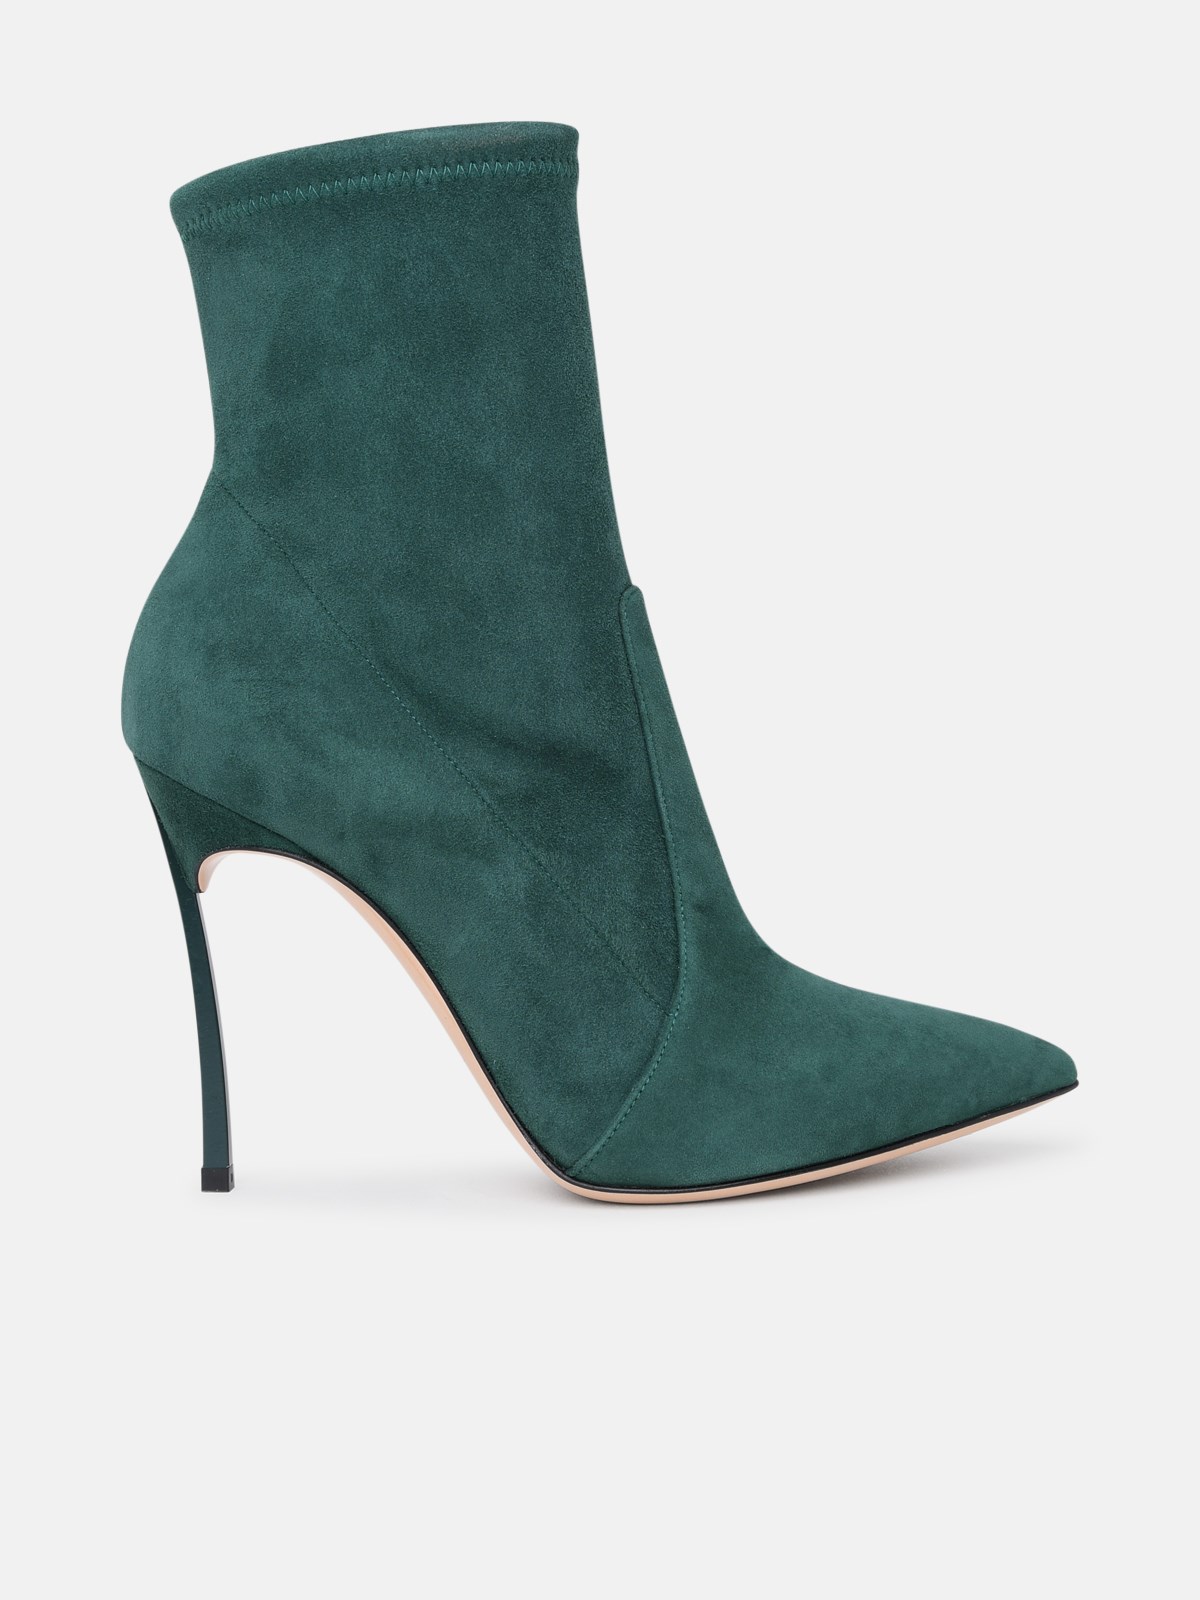 Casadei Green Suede Blade Ankle Boots